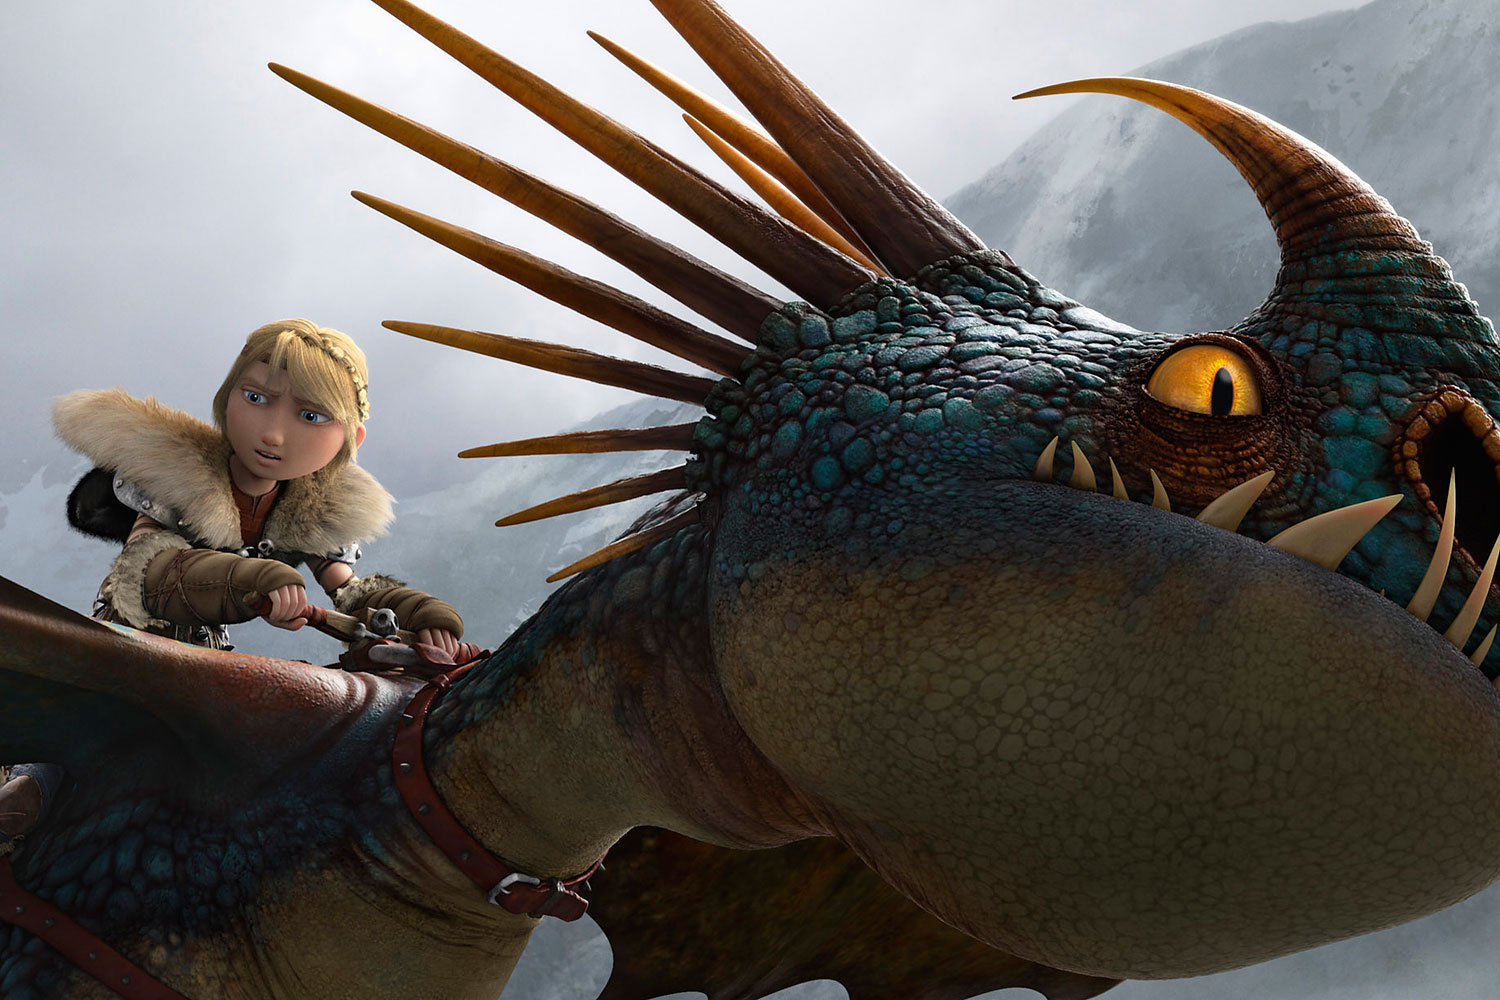 How To Train Your Dragon 2 Review: Call it Game of Dragones | Time